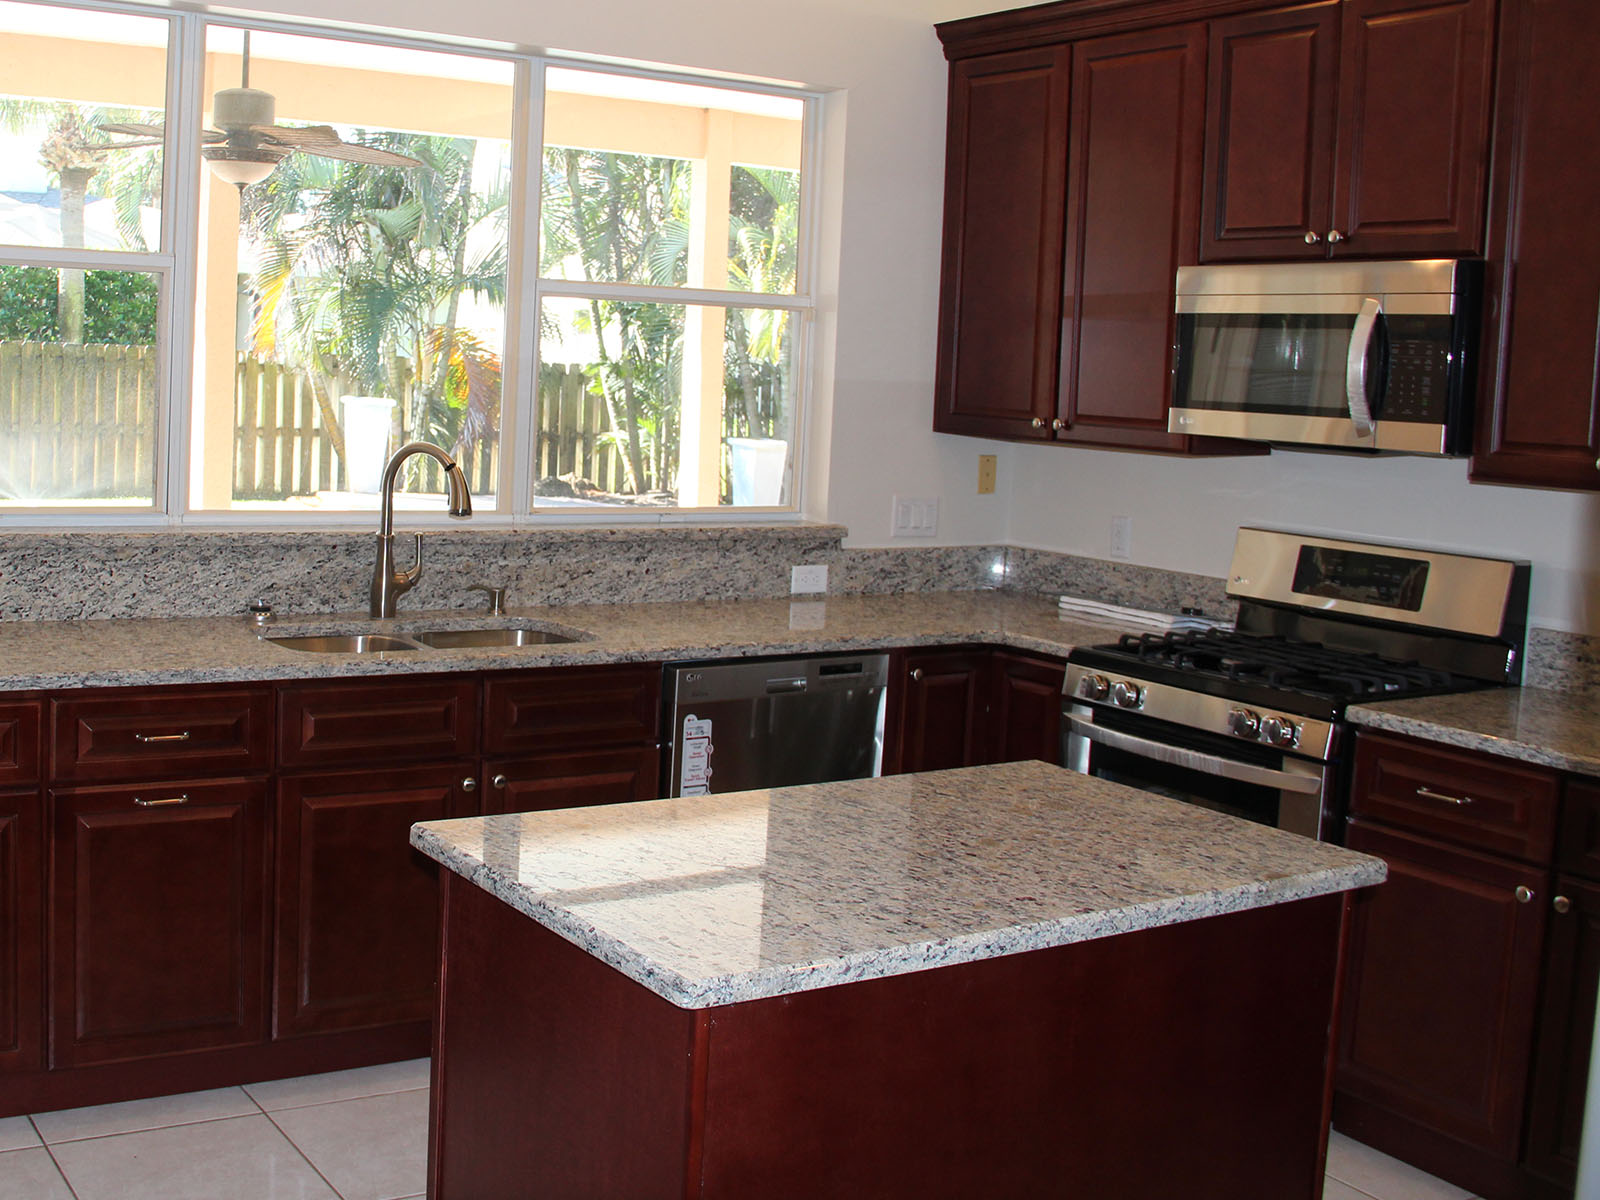 Redwood colored cabinets with white and black glassy colored countertops